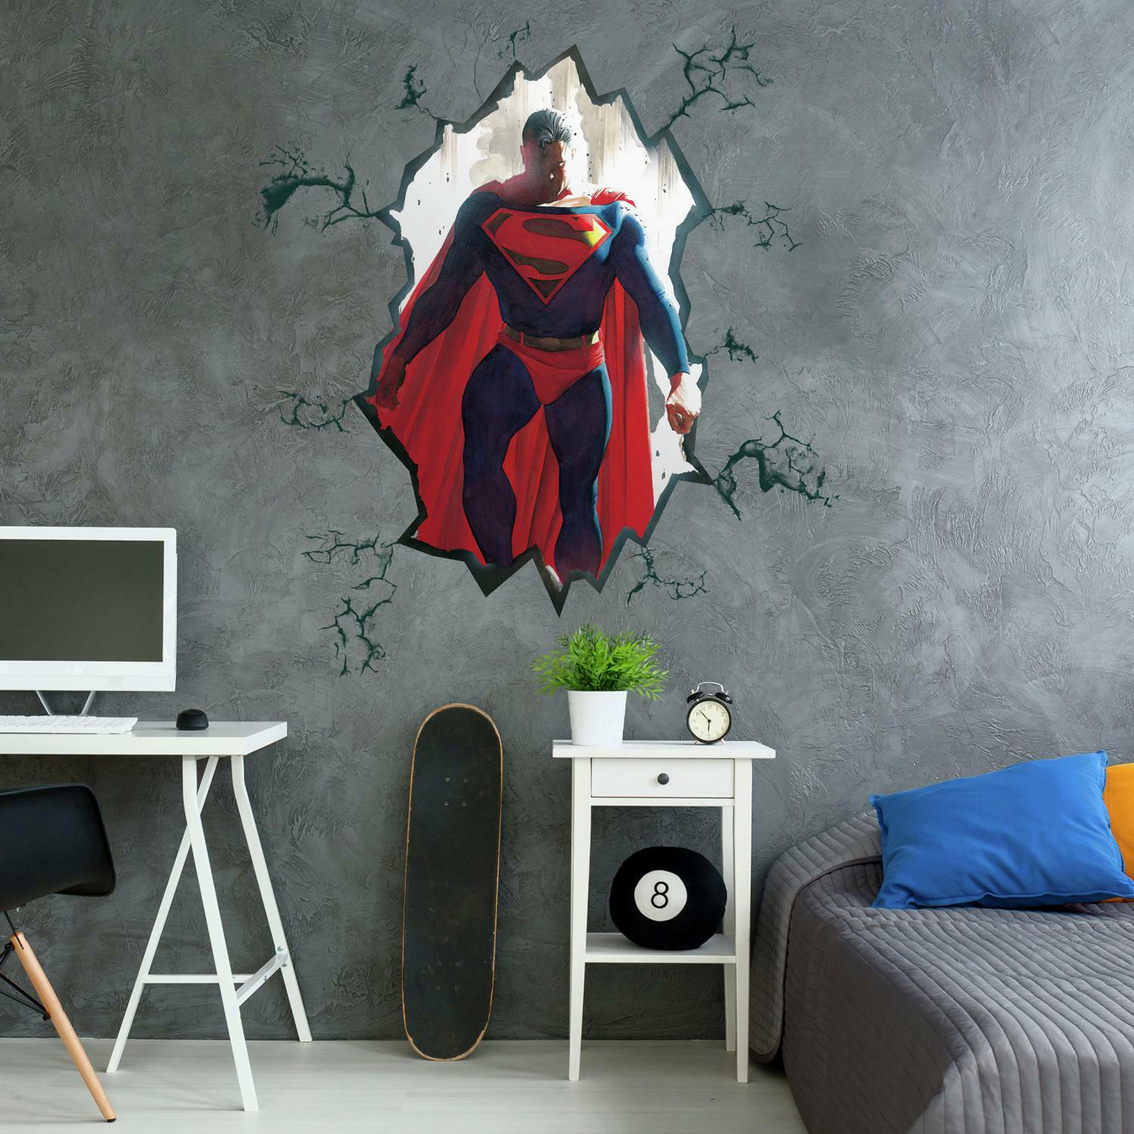 RoomMates Alex Ross Superman Cracked Peel and Stick Giant Wall Decal - Image 2 of 5